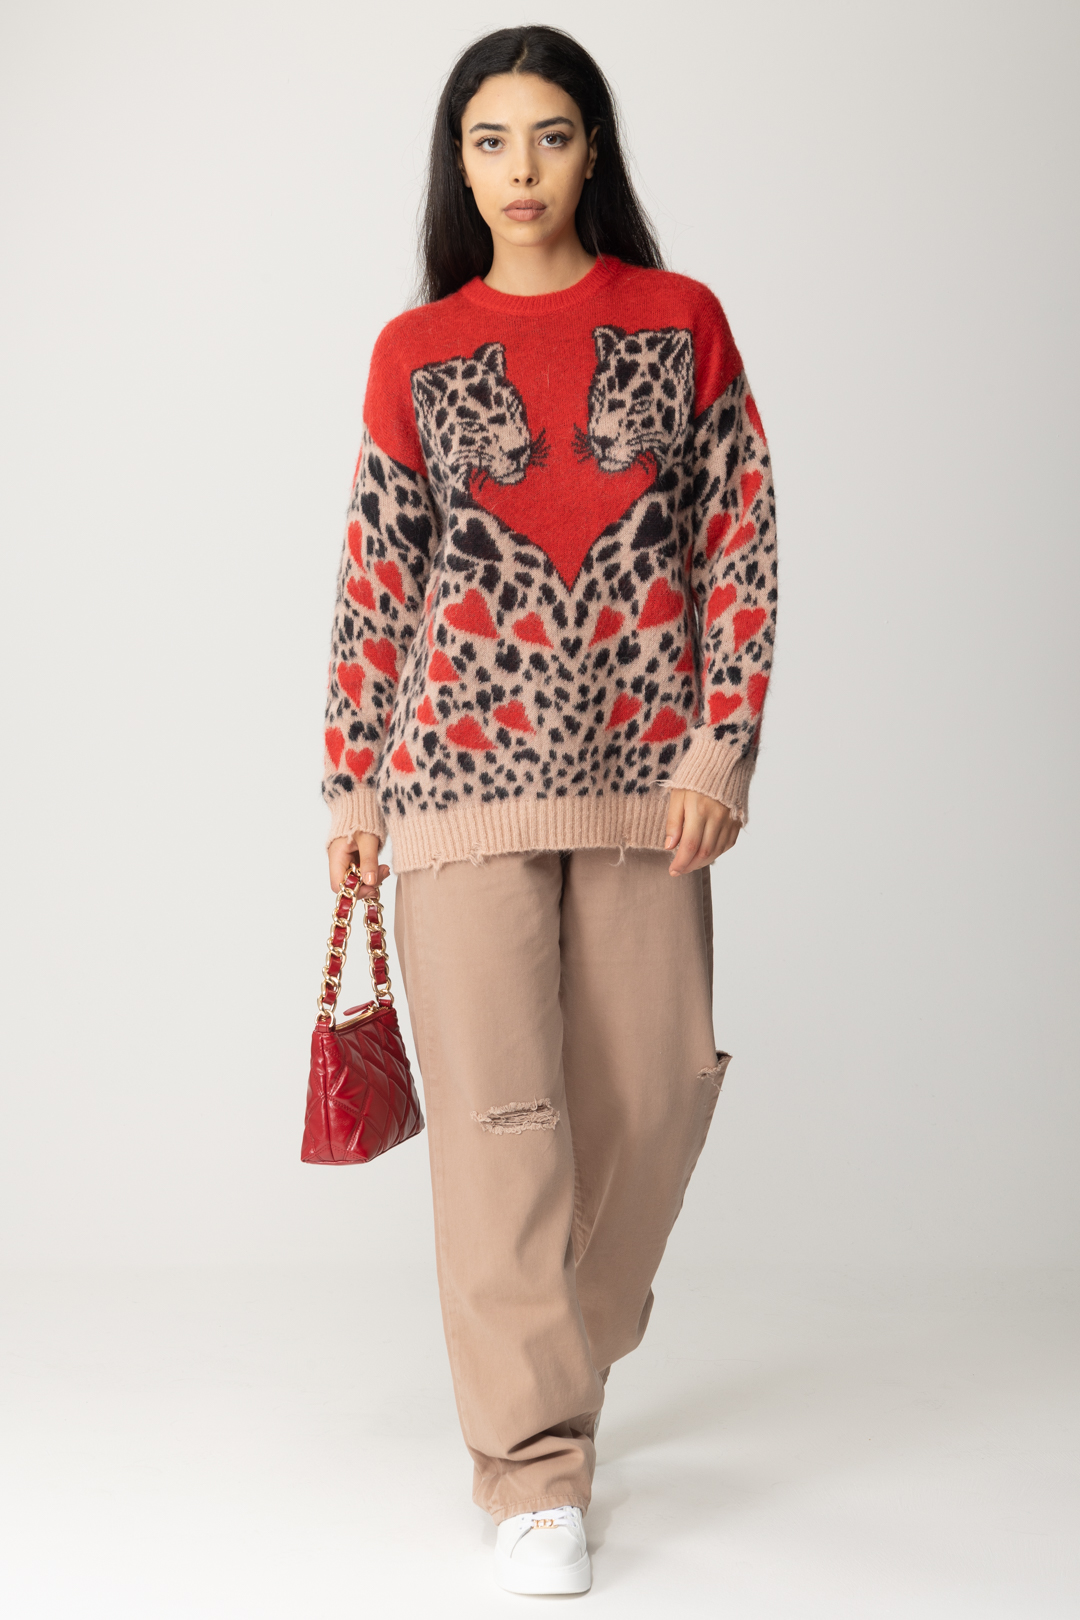 Preview: Aniye By Leopard print jumper RED LEO